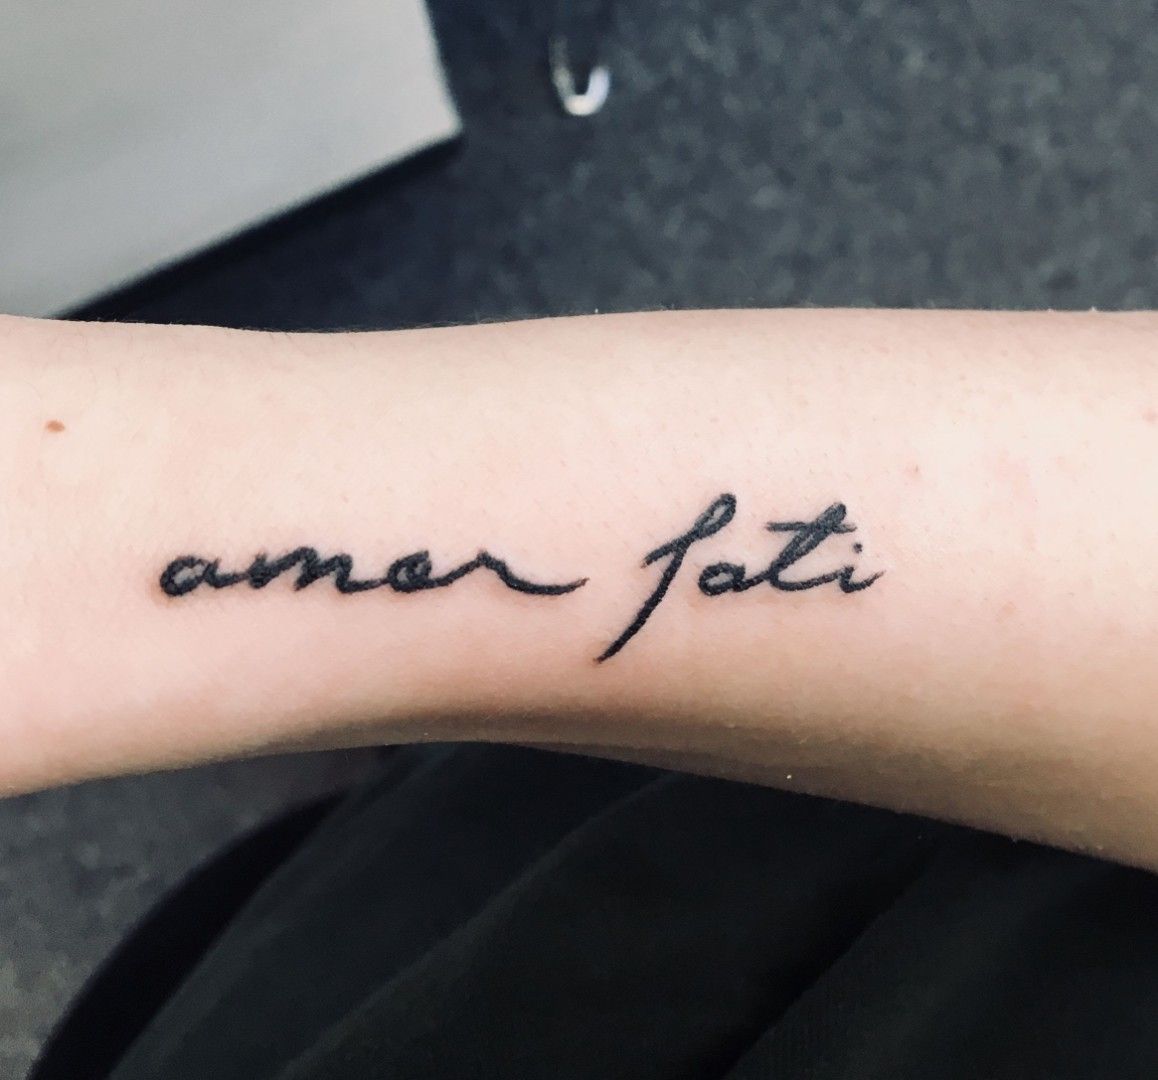 Tattoo that says amor fati hand poked on the forearm